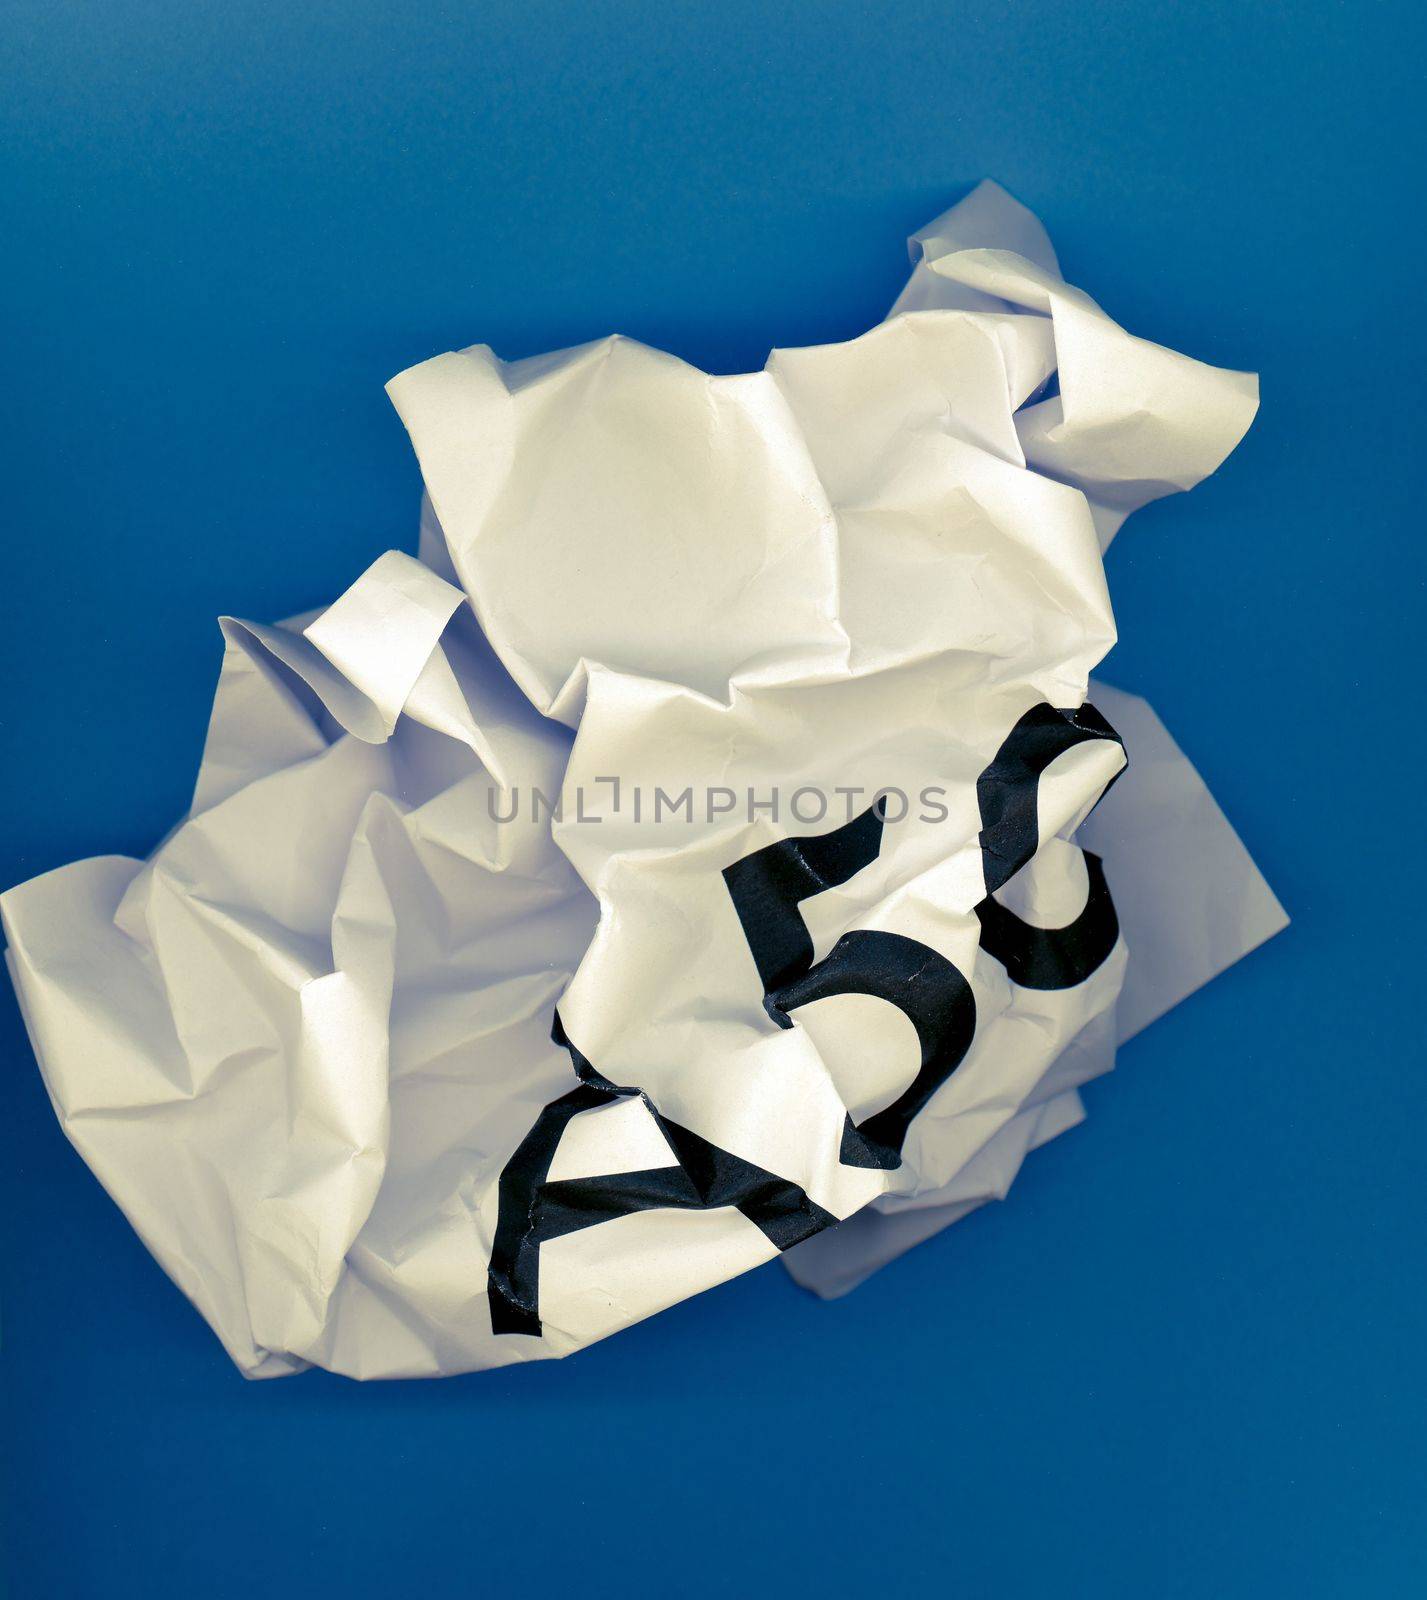 Crumpled paper ball with word A50 representing the growing request to revoke Article 50 to stop Brexit and remain in the EU, after the ECJ decision and May deal failure